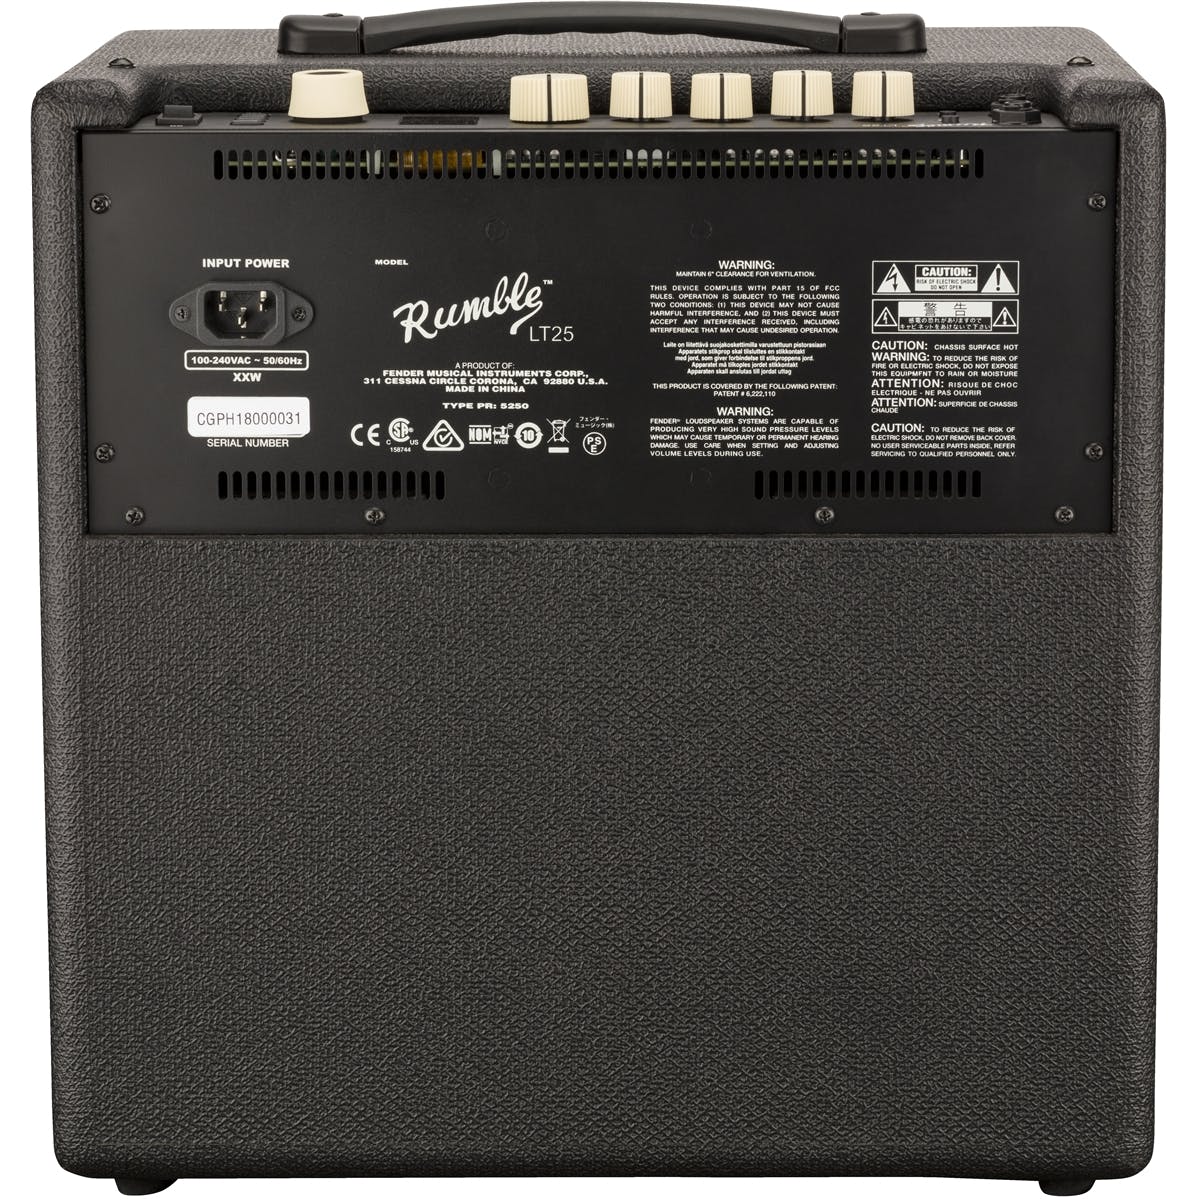 Fender Rumble LT25 Lightweight Electric Bass Combo Amplifier 25watts 120V (230V EUR) with 8in Speaker 1.8” Color Display 20 Effects 50 Presets USB Output